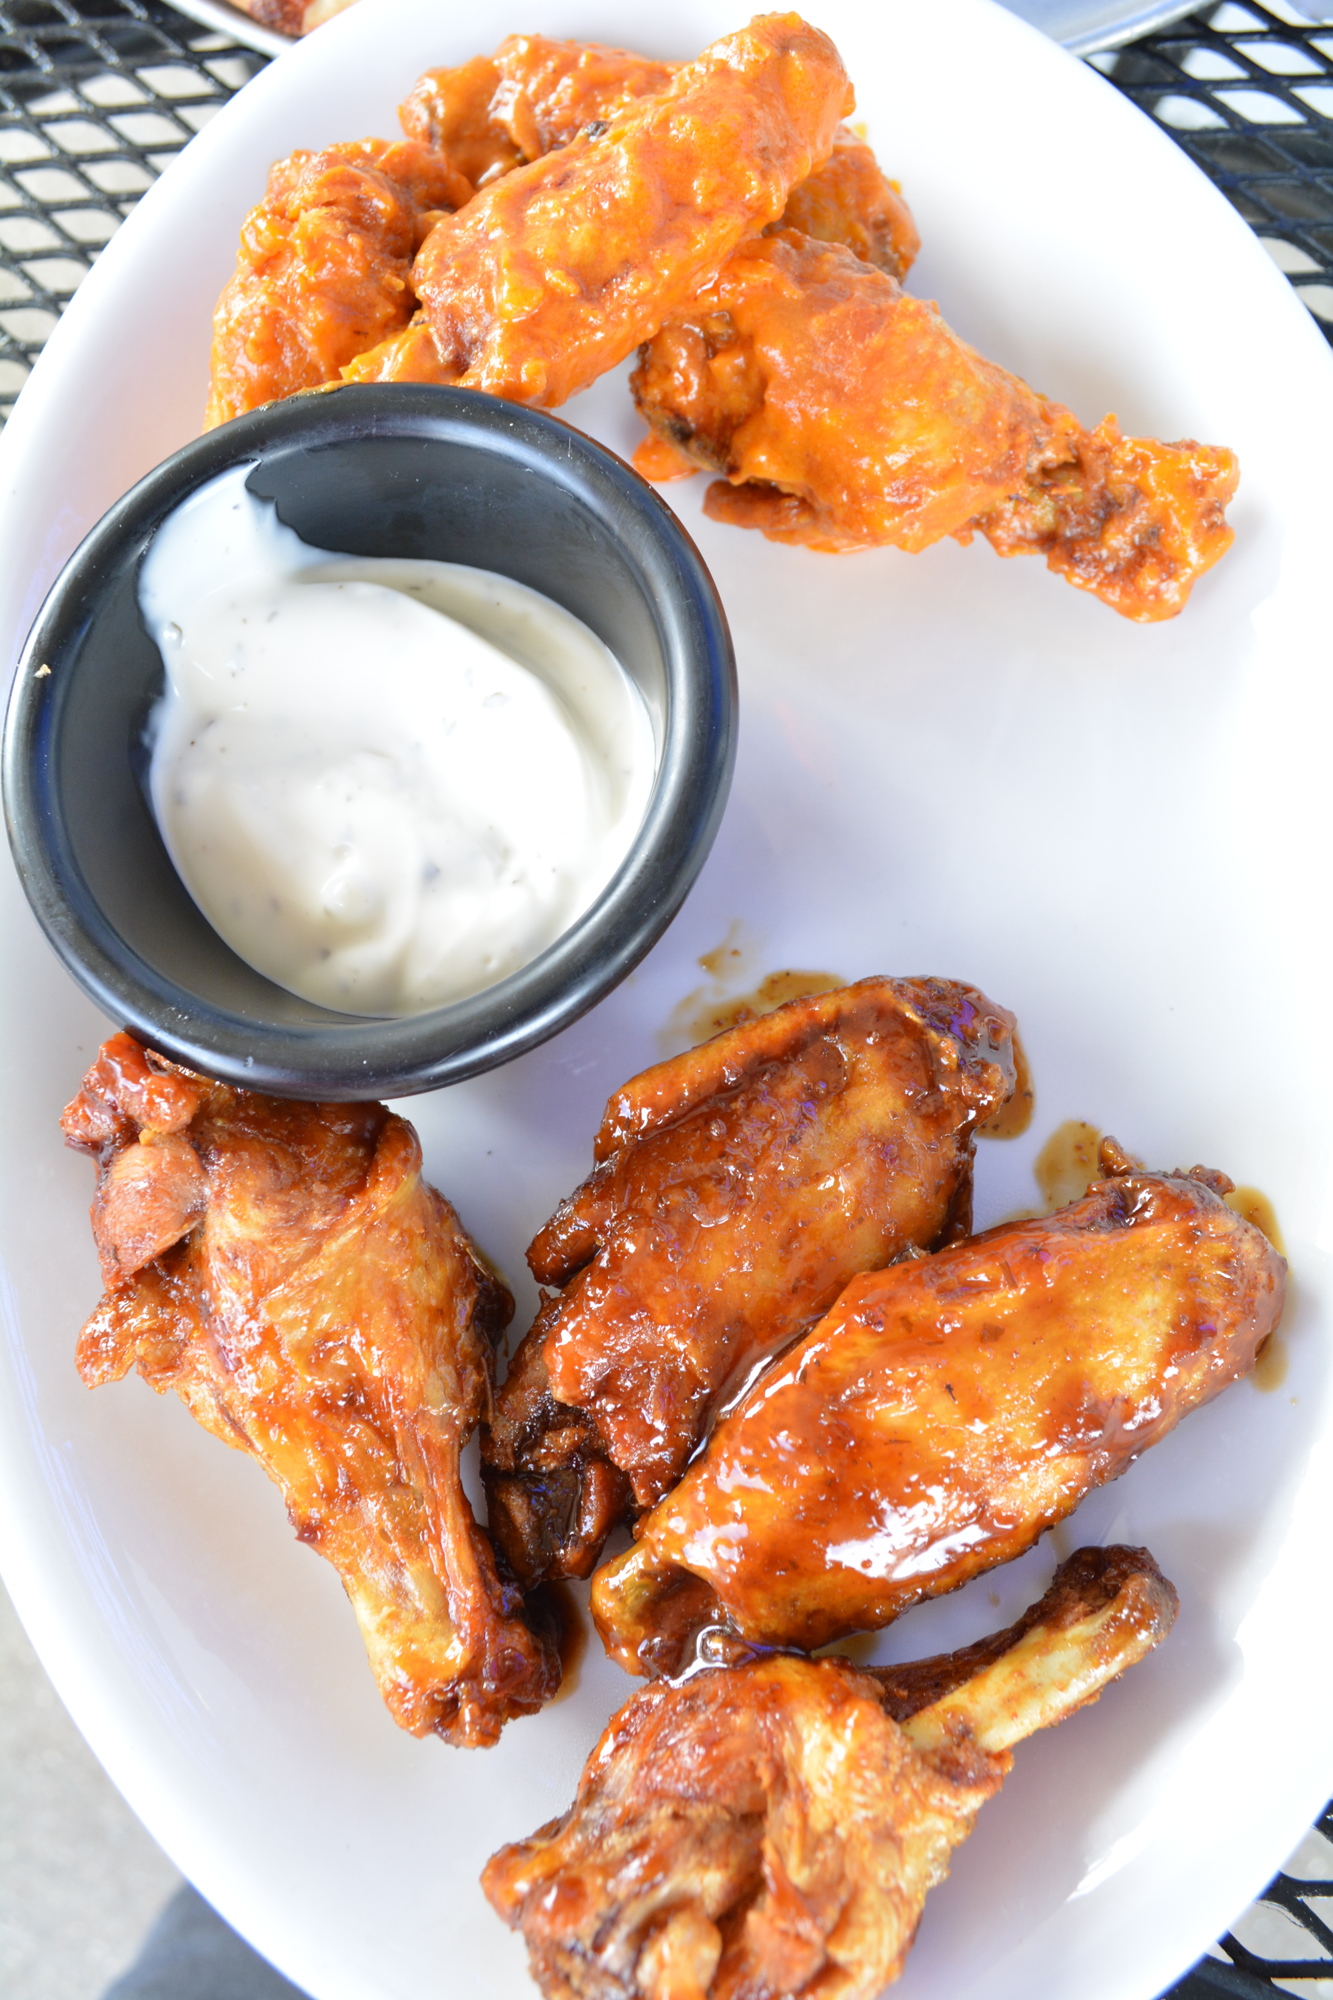 Wings are baked, then fried so they stay extra crispy, owner John Cox says.